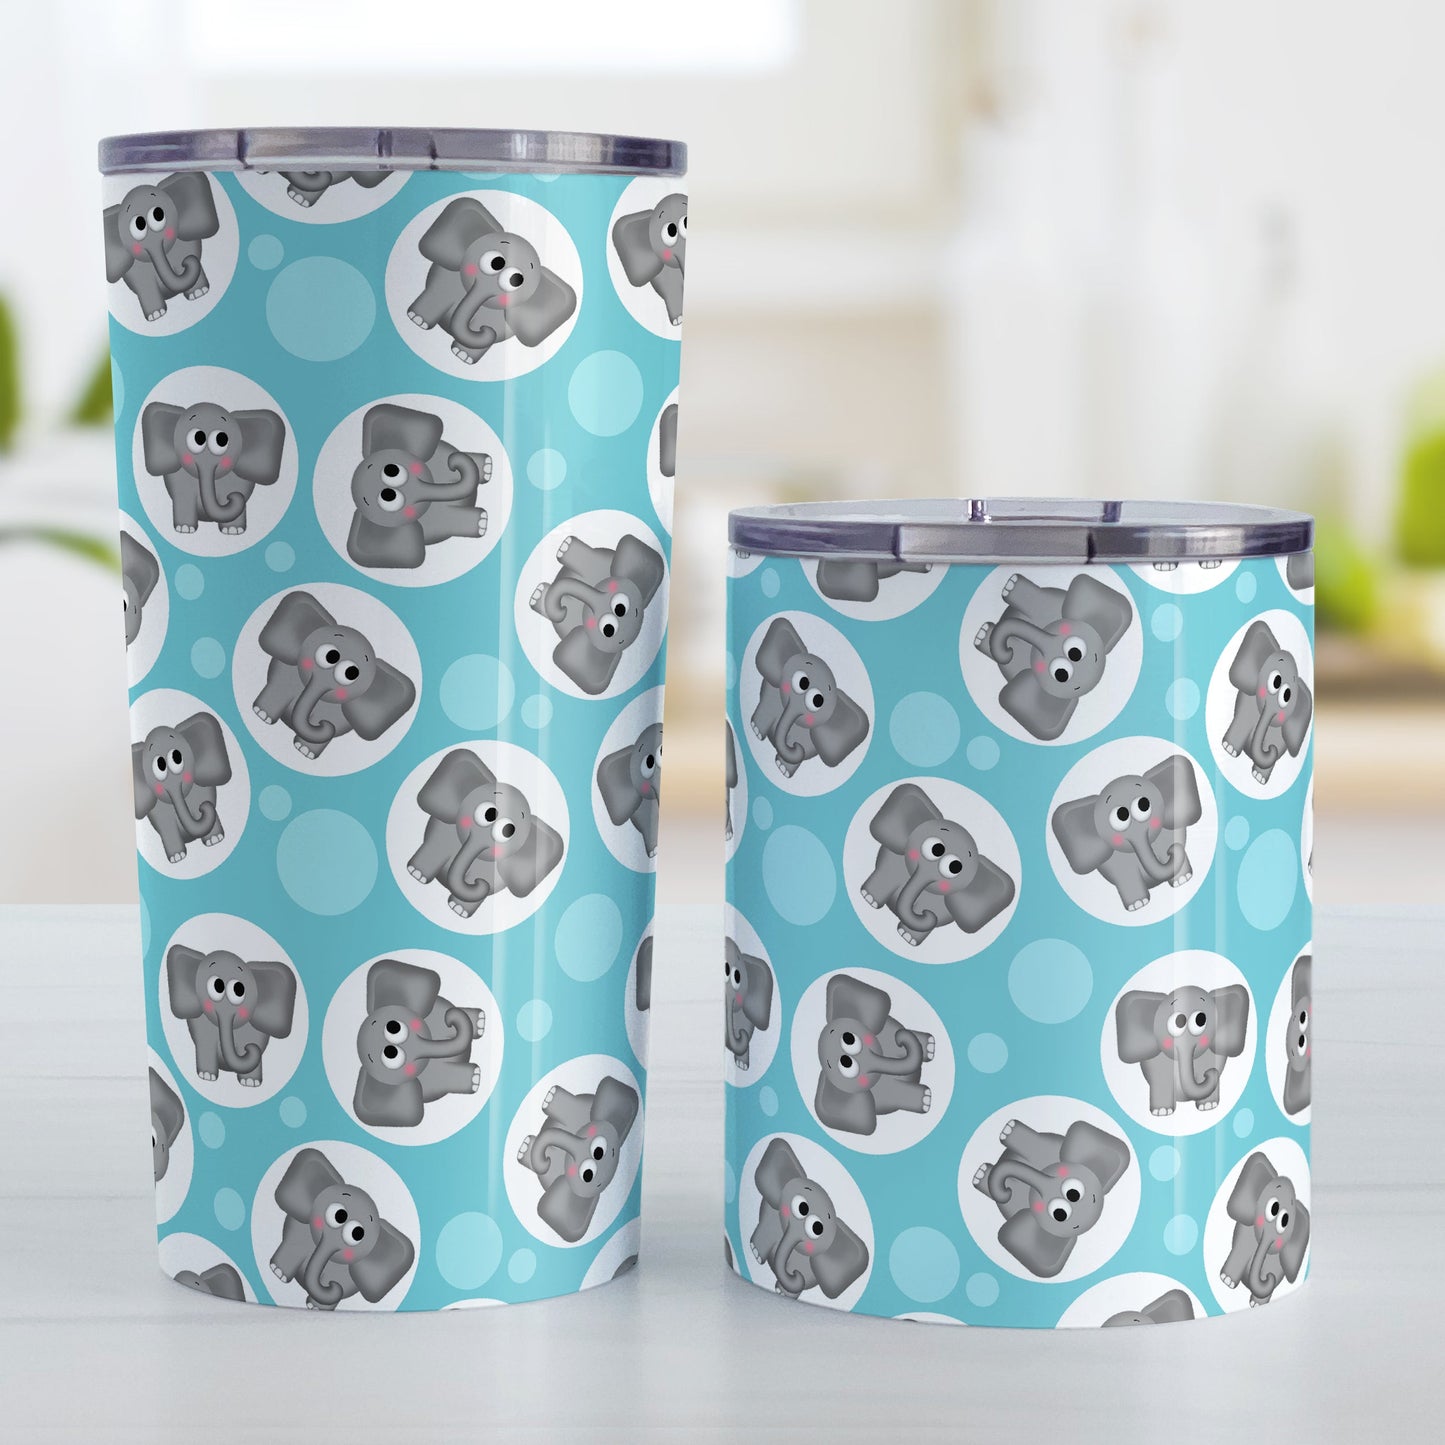 Cute Turquoise Elephant Pattern Tumbler Cup (20oz and 10oz, stainless steel insulated) at Amy's Coffee Mugs